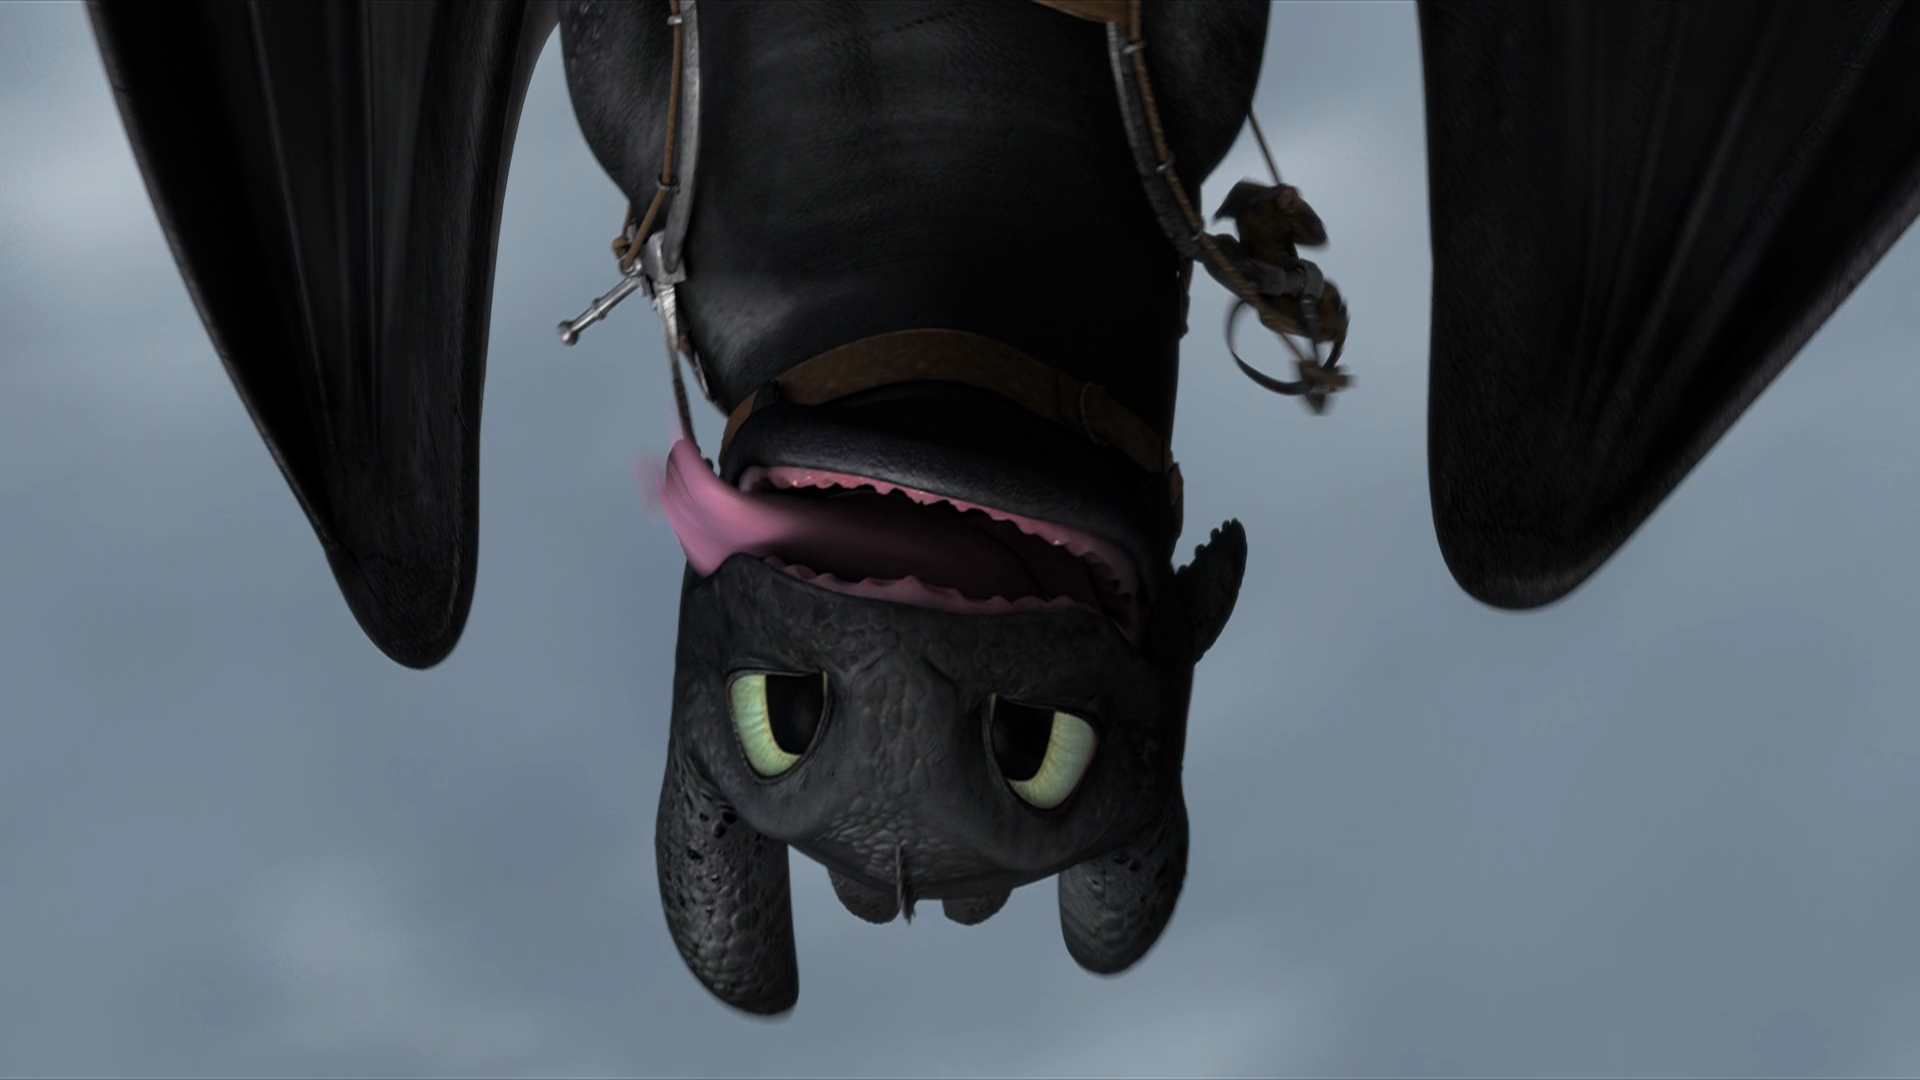 How To Train Your Dragon 2 Computer Wallpapers, Desktop ...